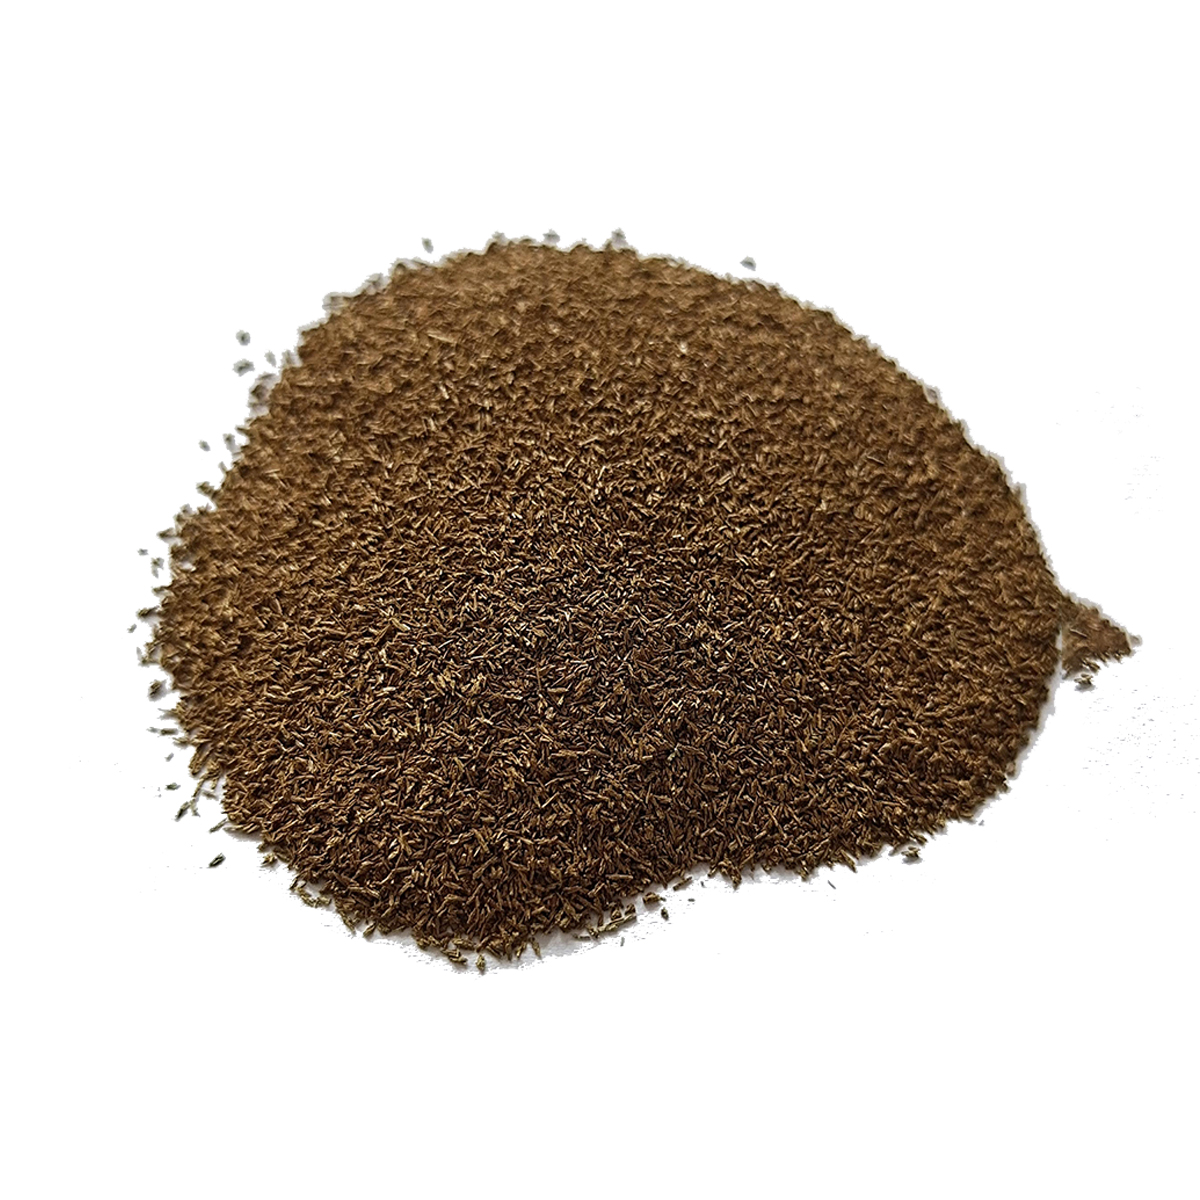 CAS:7447-39-4 |Anhydrous cupric chloride Manufacturer High purity 98% powder CuCl2 Featured Image